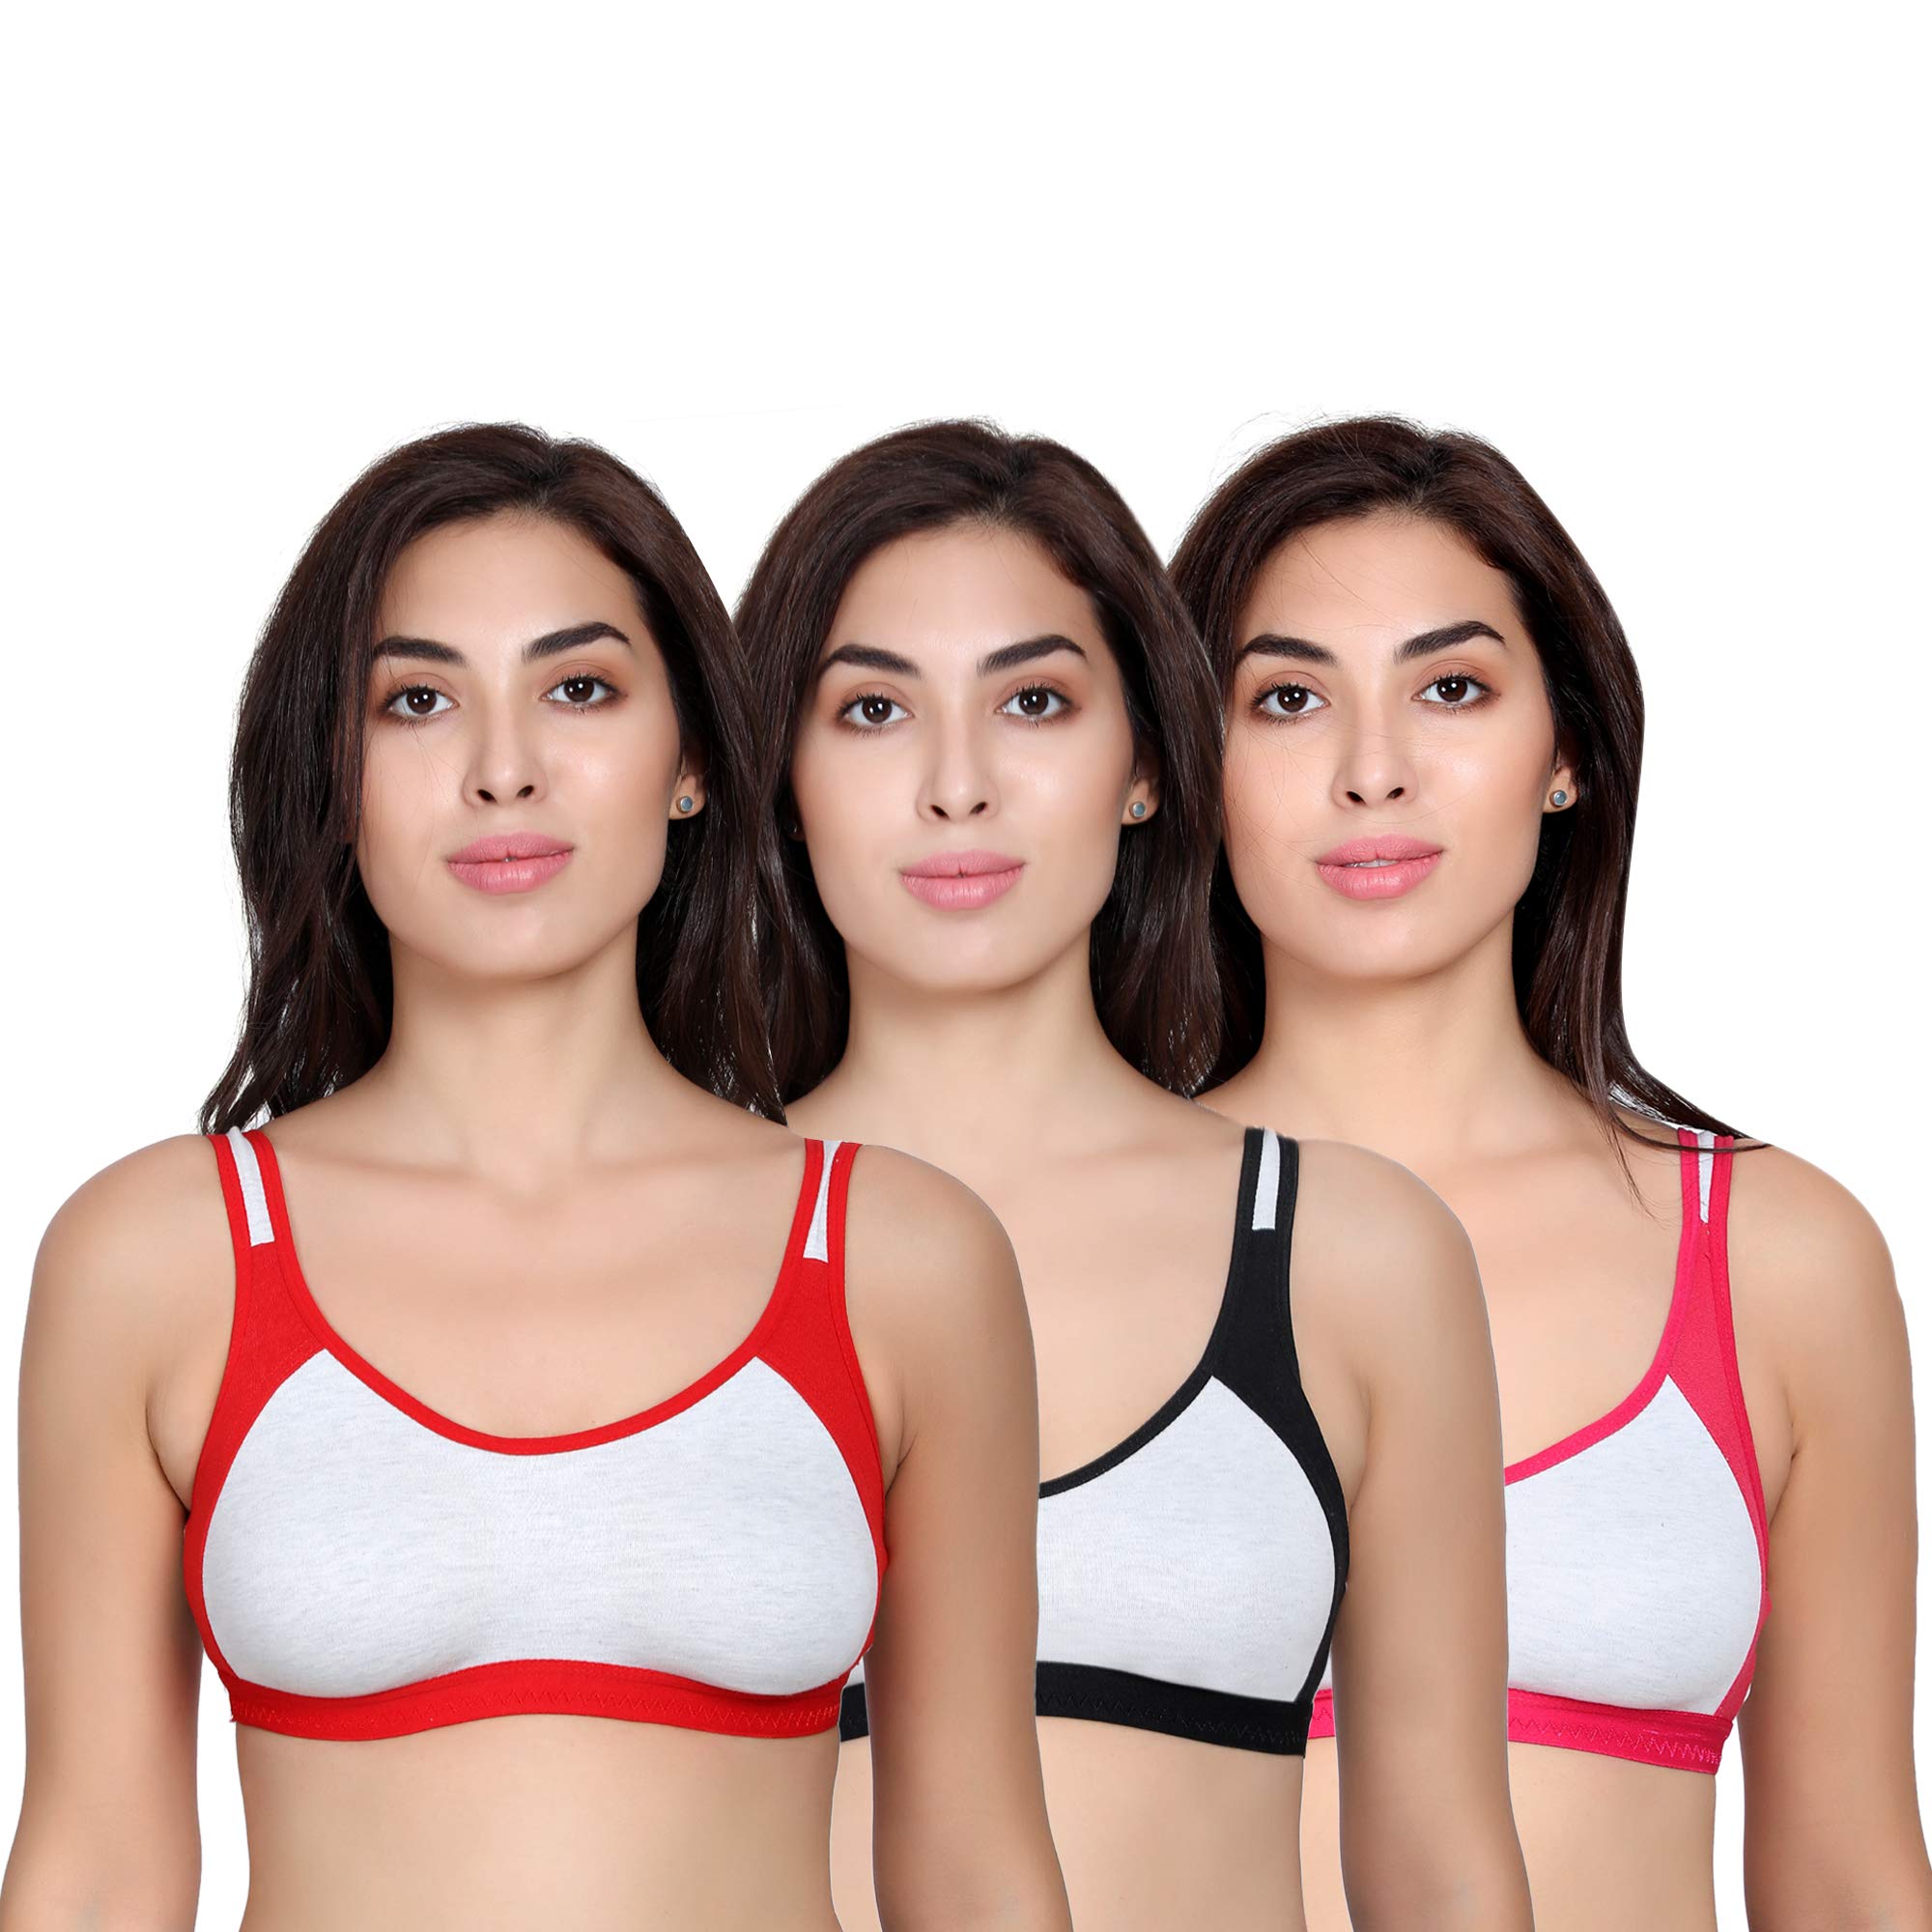 Fashion Bones - Women's Cotton Non Padded Non-Wired Sports Bra (Pack of 3)